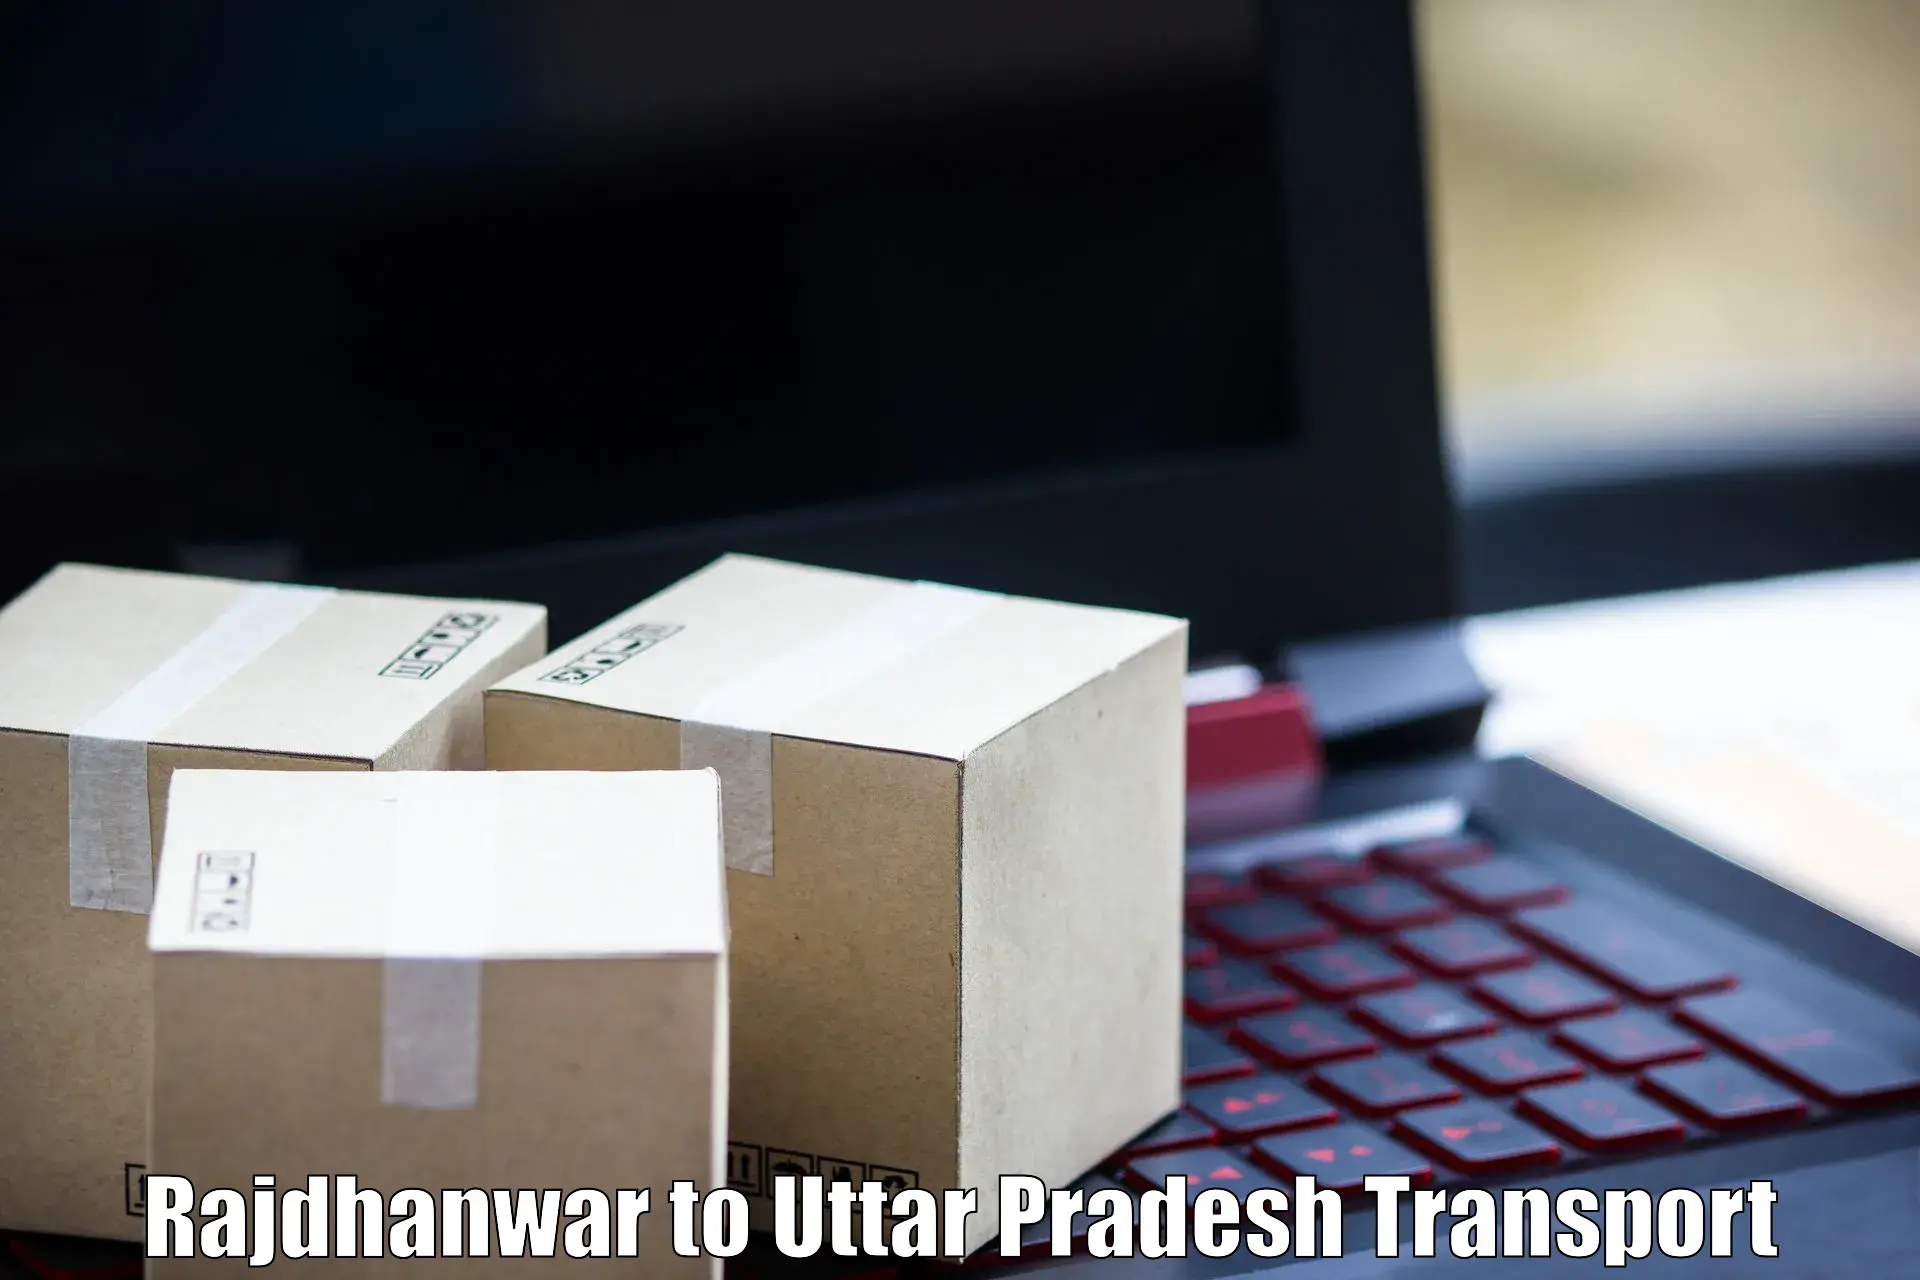 Air cargo transport services Rajdhanwar to Poonchh